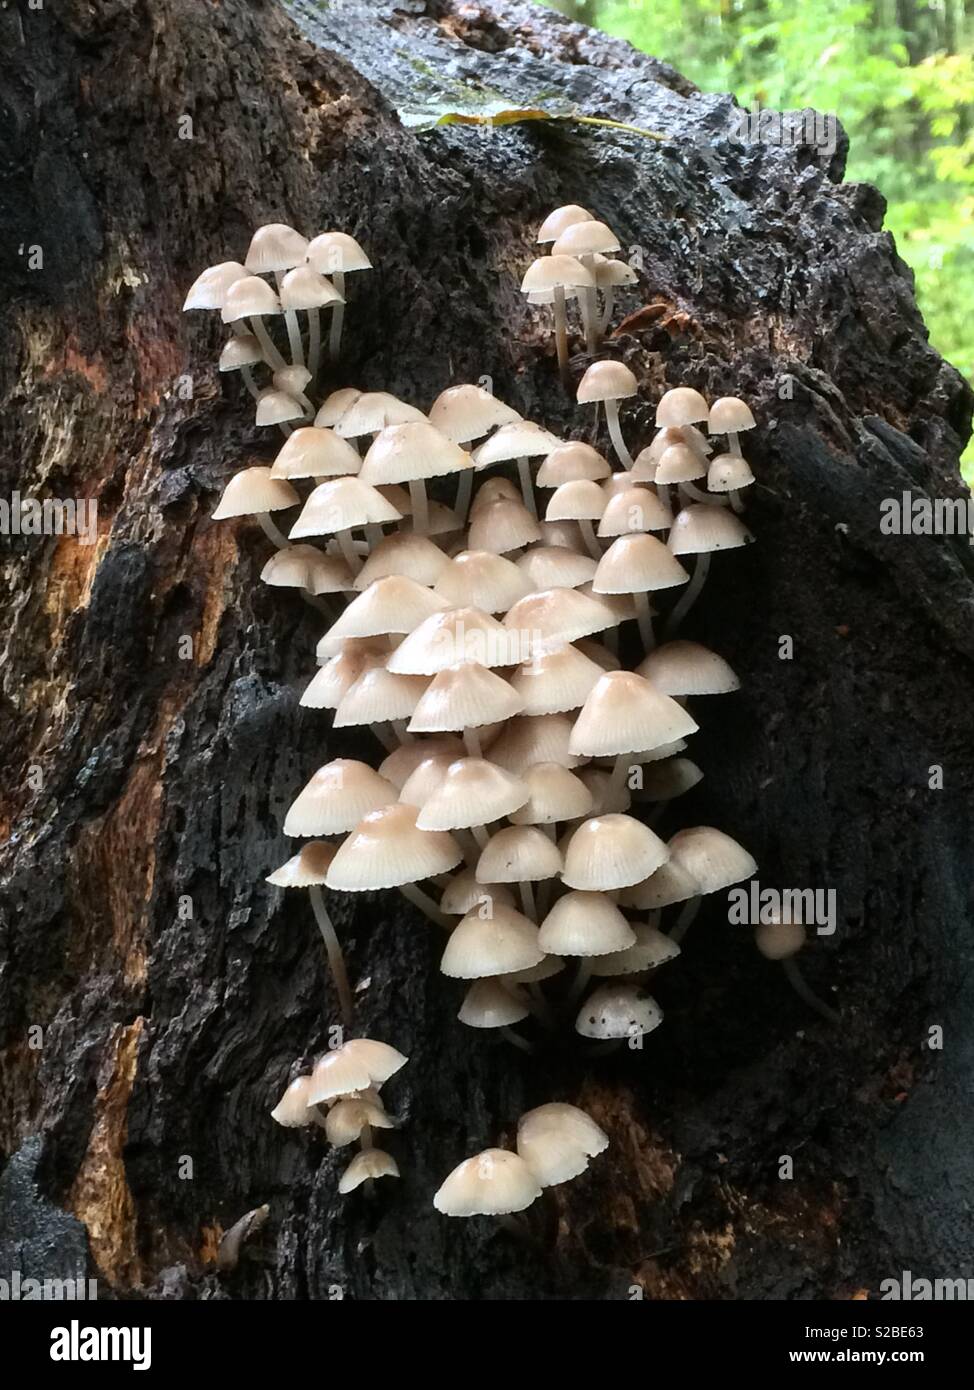 Small mushrooms growing on a dead log Stock Photo